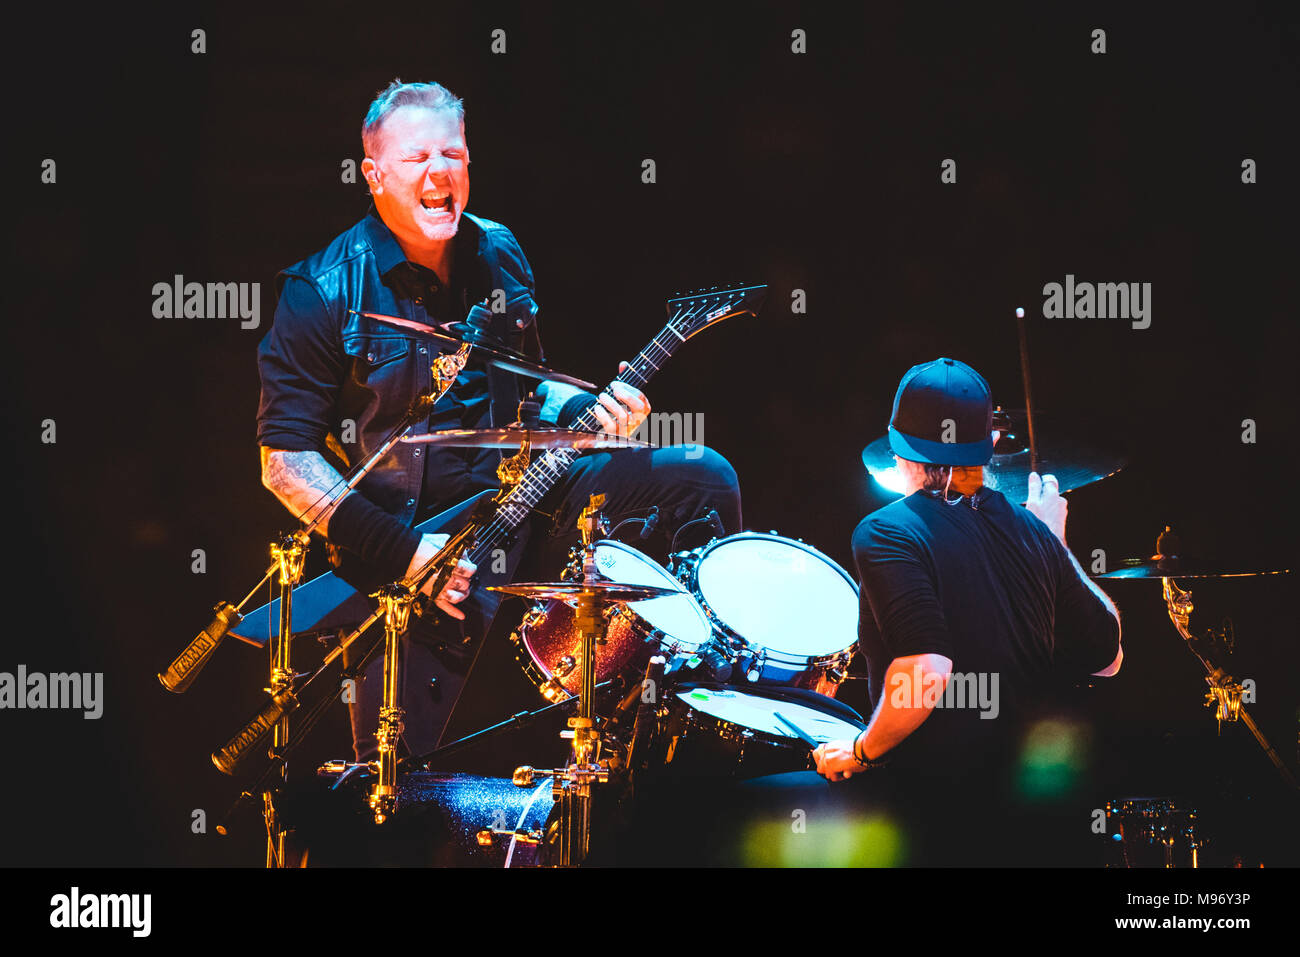 Italy:The american band Metallica performing live on stage in Torino, for the 'Worldwired' tour concert. Photo: Alessandro Bosio/Alamy Live News Stock Photo